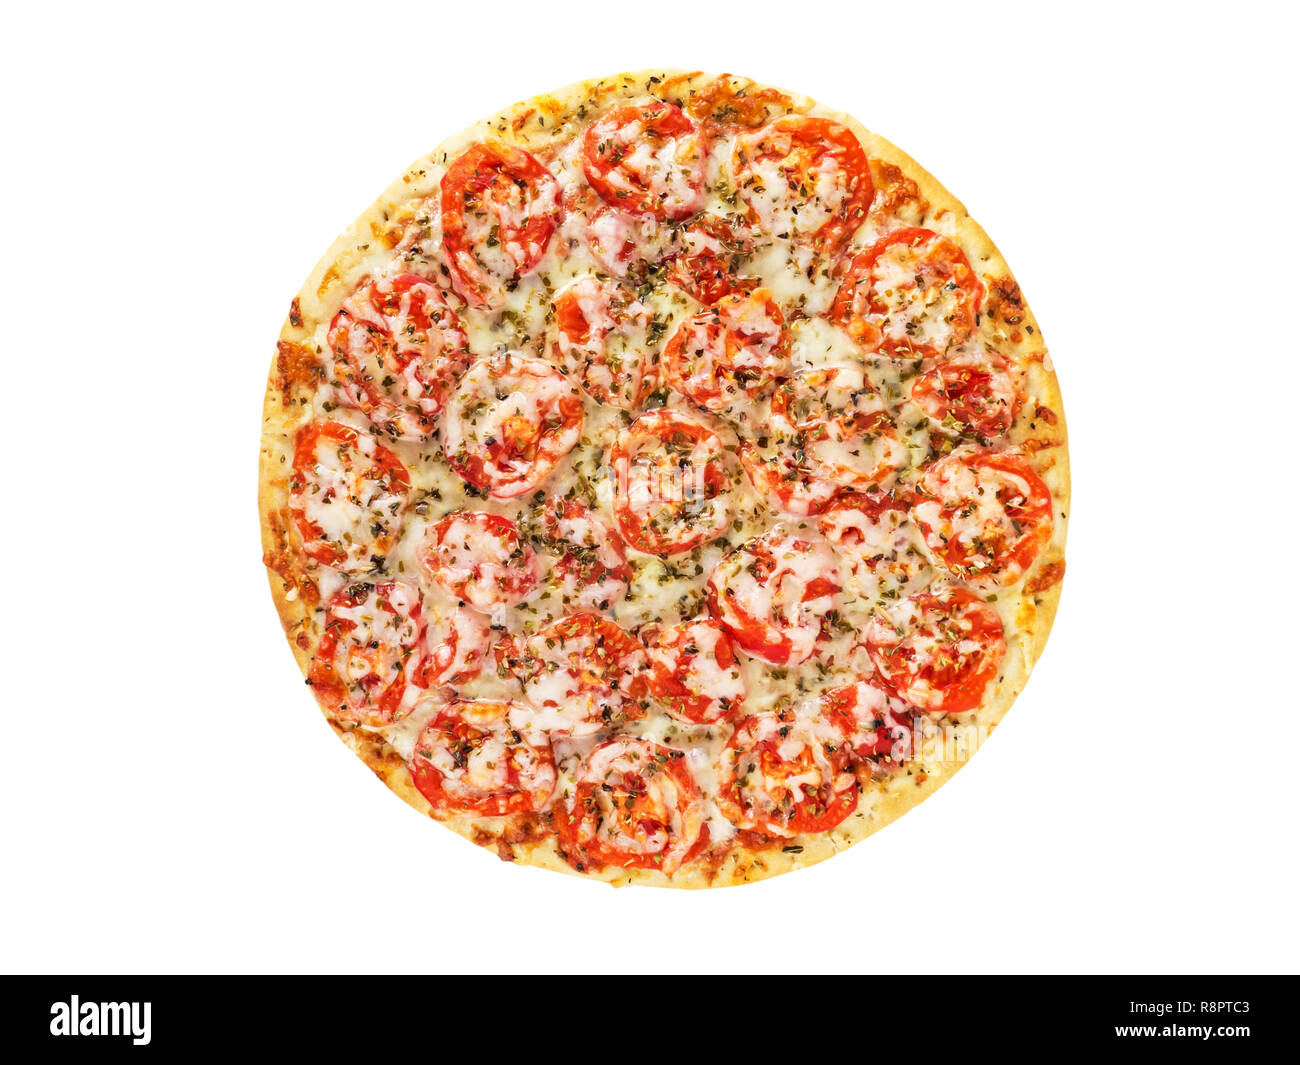 Pizza Margherita or Margarita with mozzarella cheese,tomatoes and basil on the thin dough top view isolated on white Stock Photo